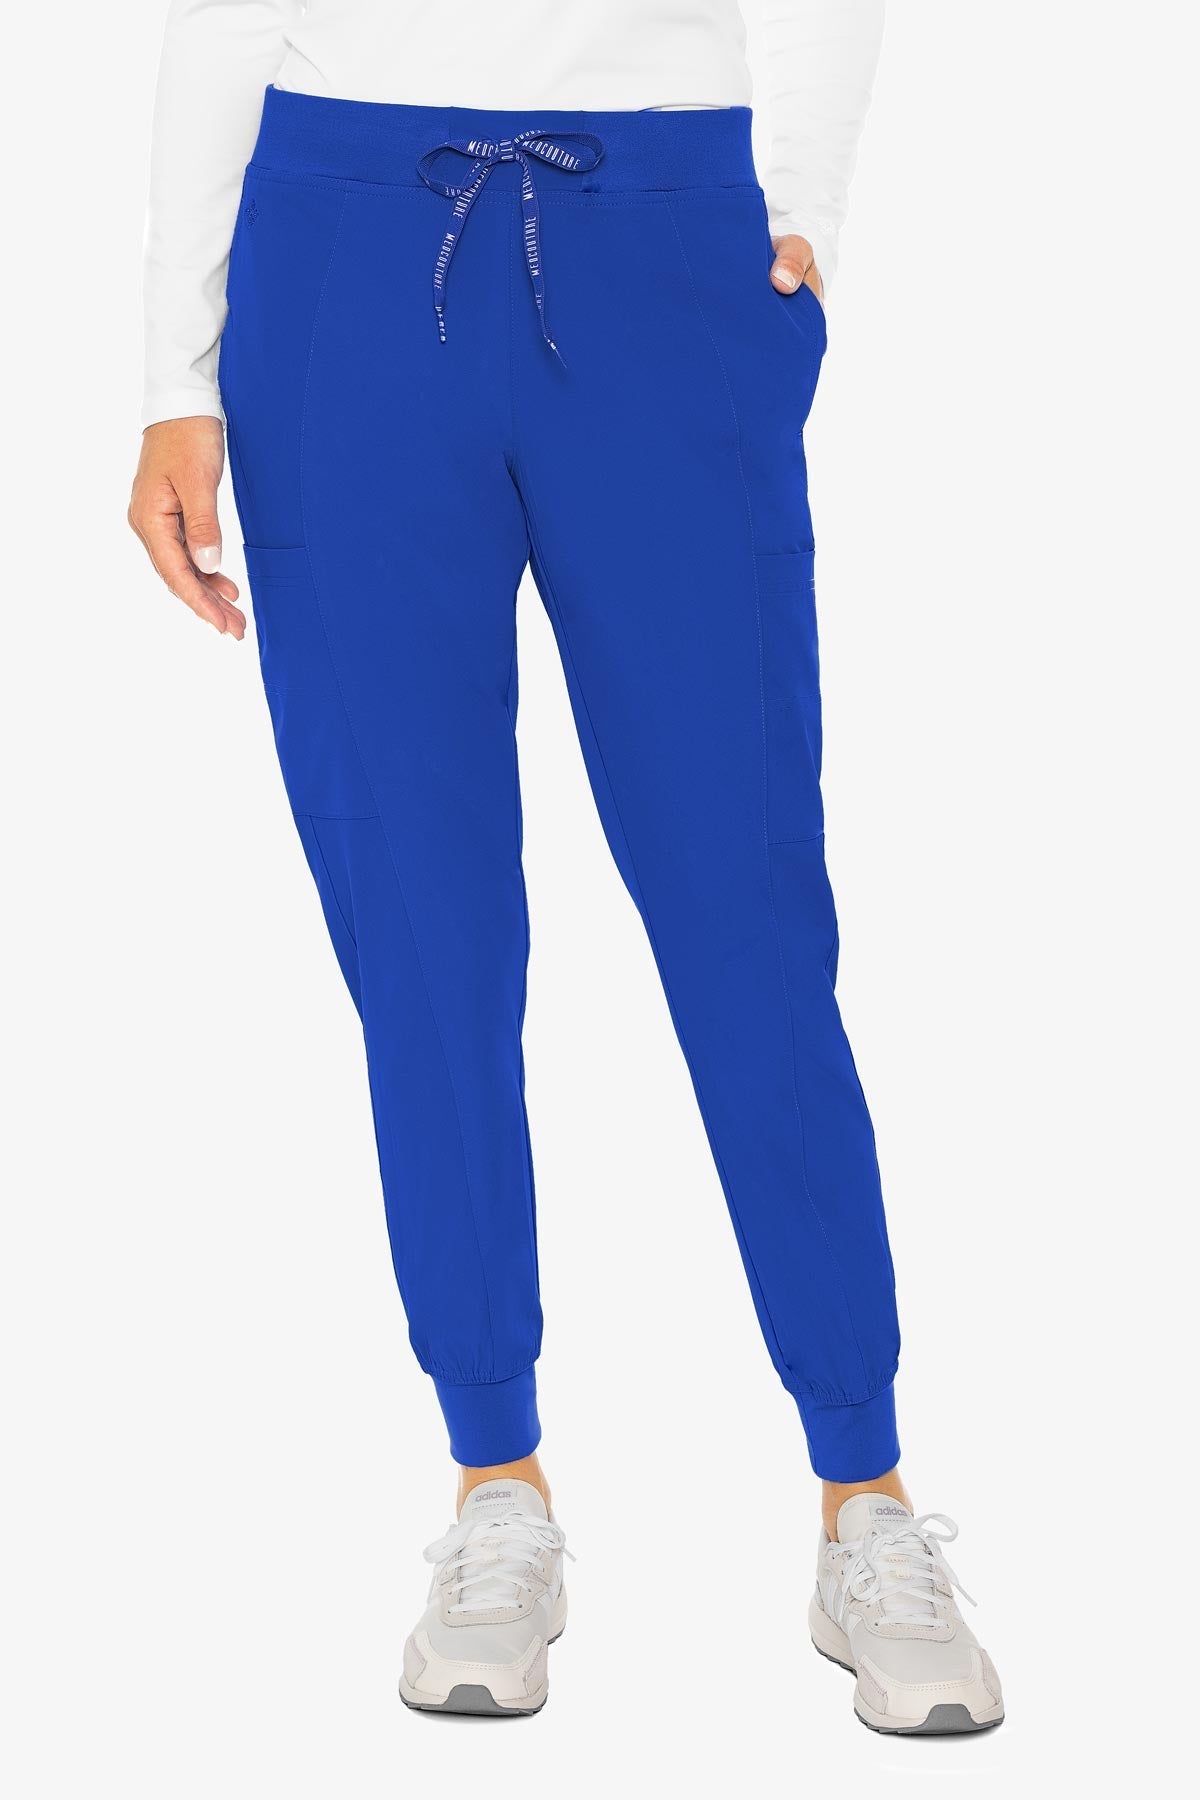 Med Couture 8721 Peaches Seamed Jogger - Royal